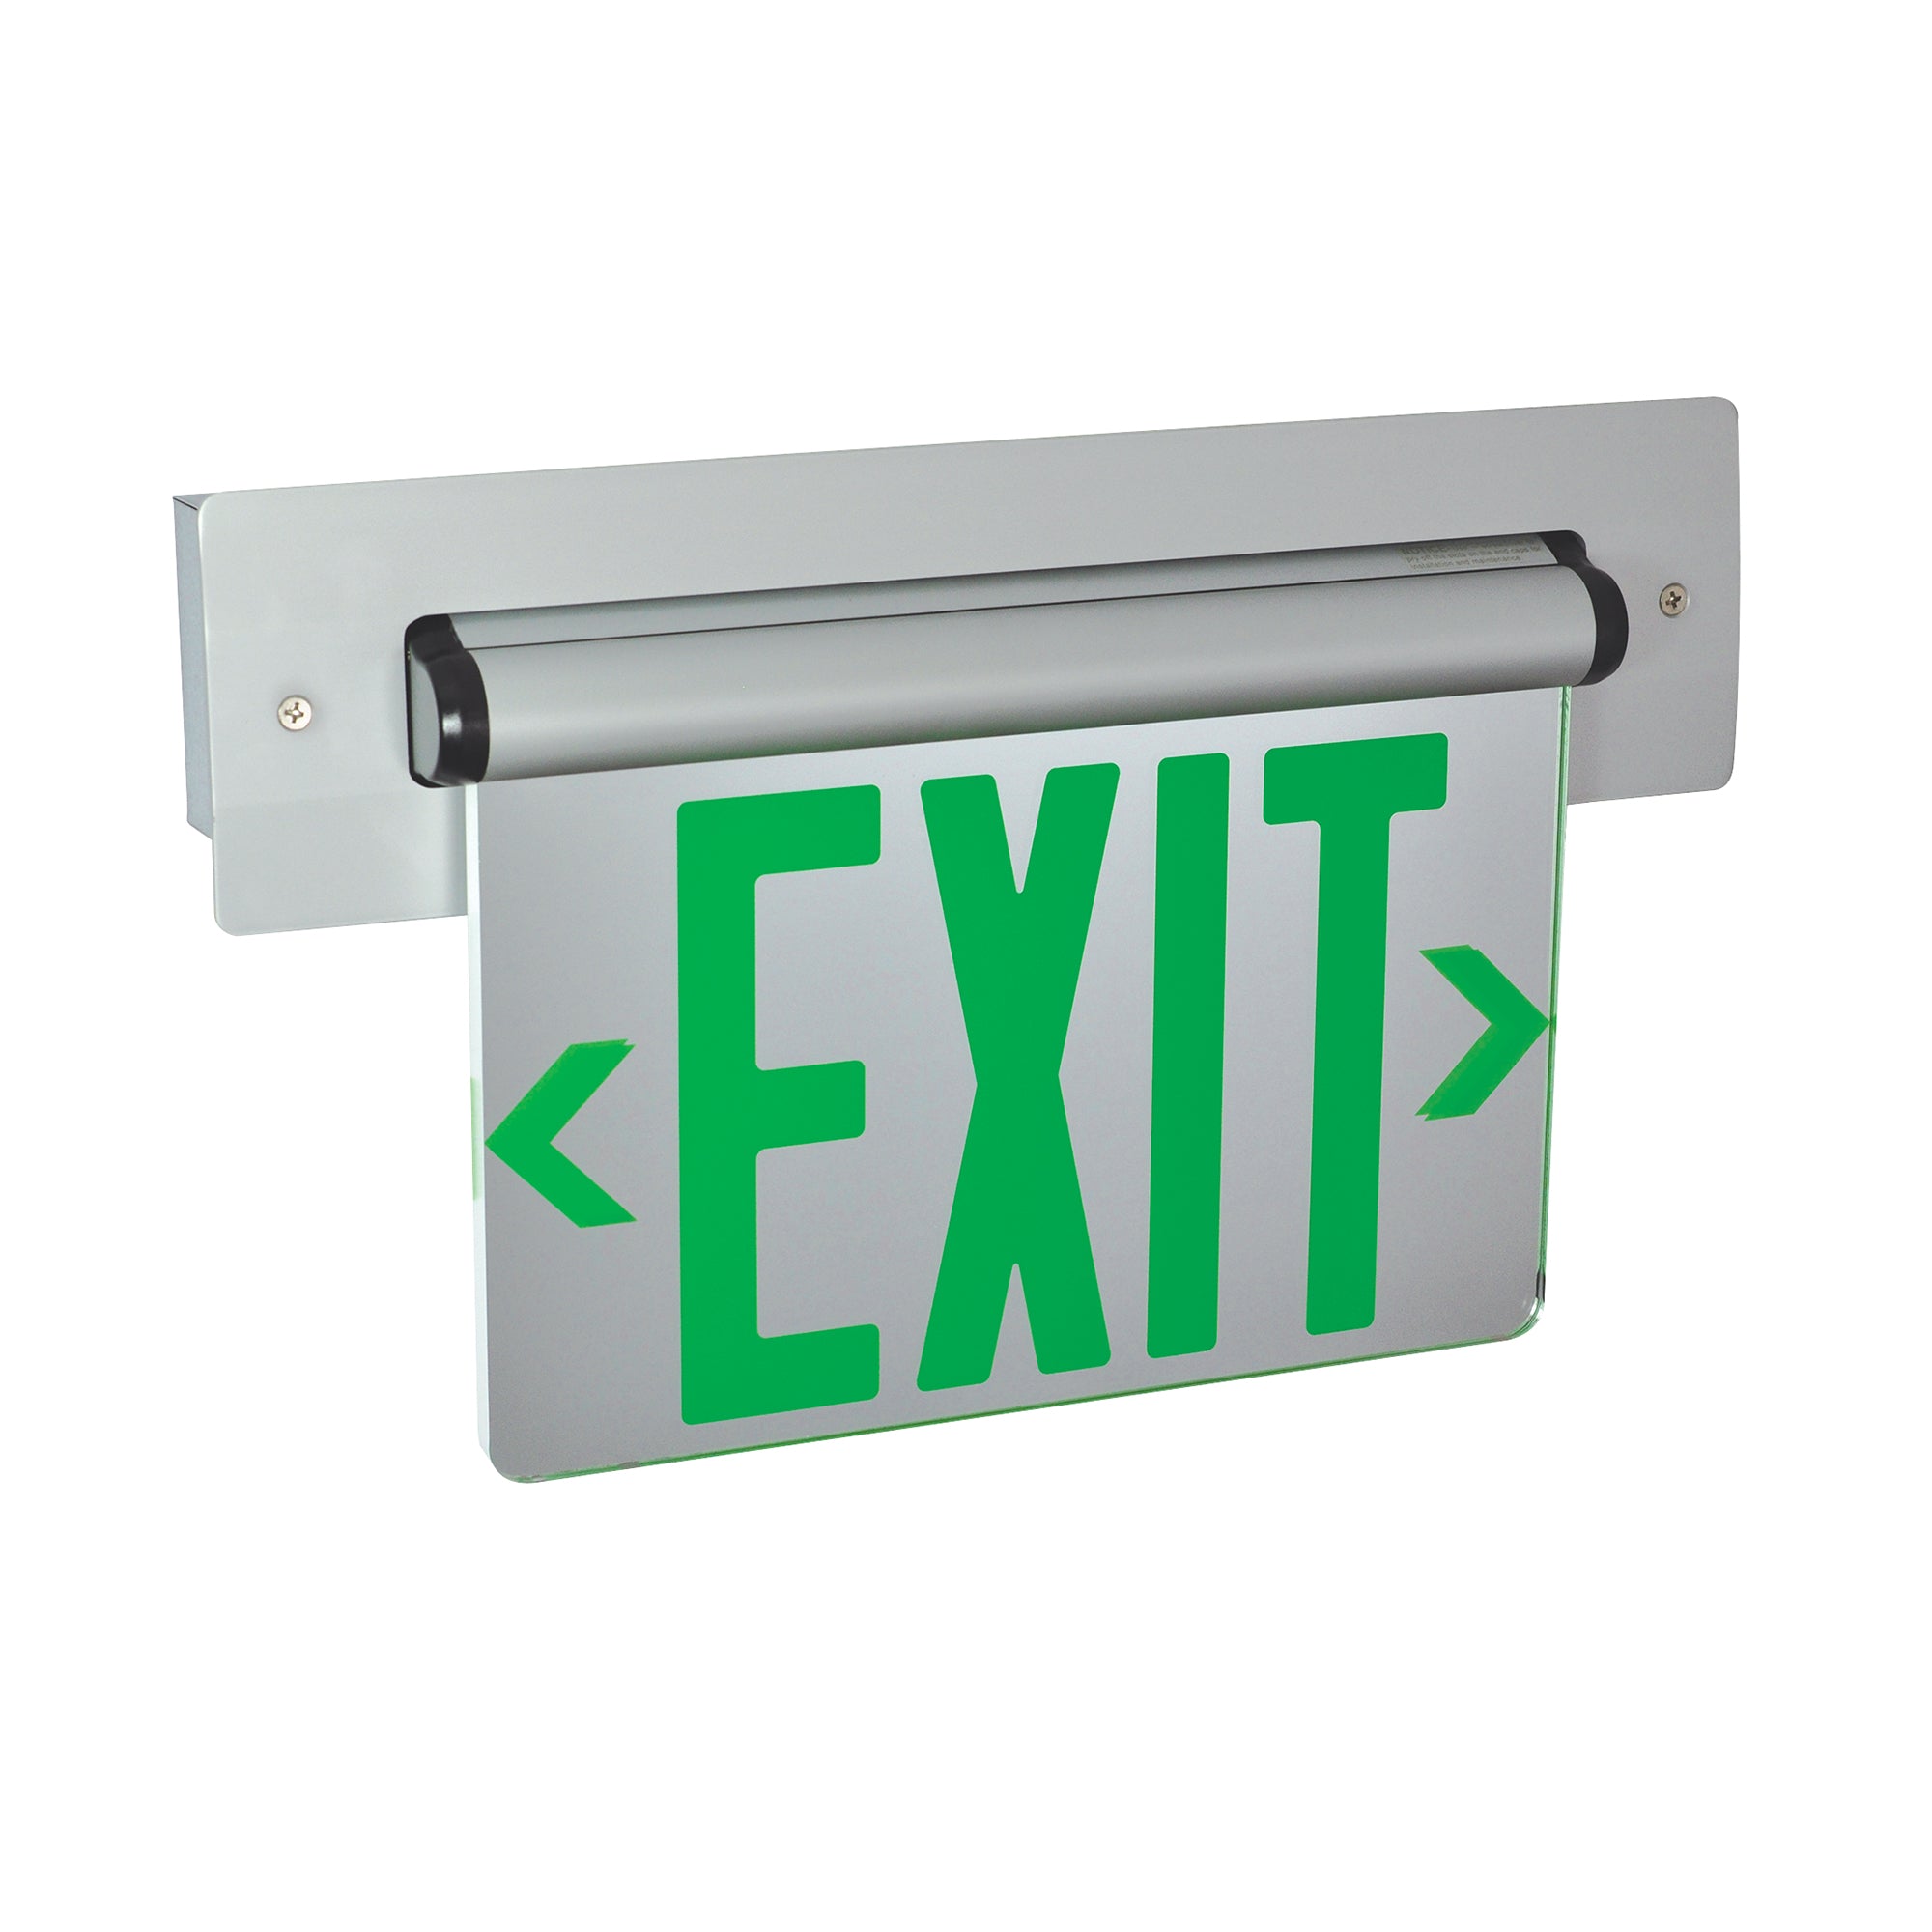 Nora Lighting NX-813-LEDGMA - Exit / Emergency - Recessed Adjustable LED Edge-Lit Exit Sign, AC Only, 6 Inch Green Letters, Single Face / Mirrored Acrylic, Aluminum Housing